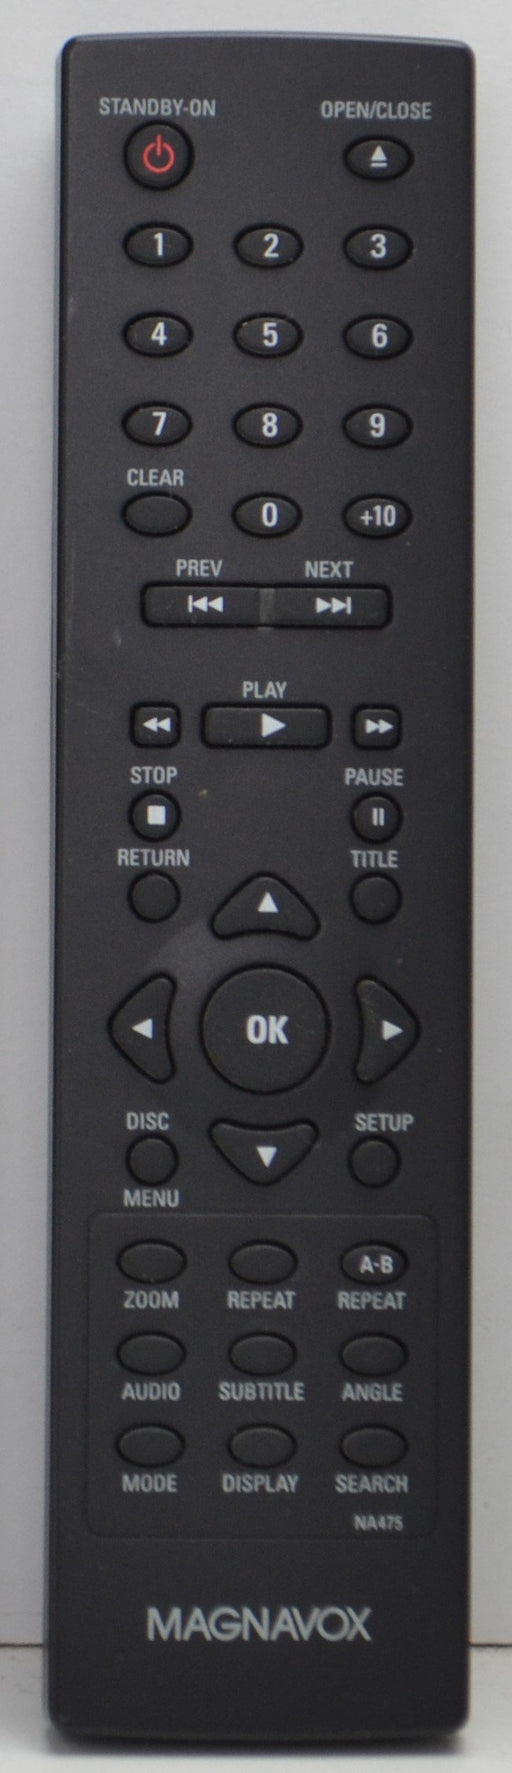 Magnavox NA475 DVD Player Remote Control for Model CDP170MW8 and More-Remote-SpenCertified-refurbished-vintage-electonics